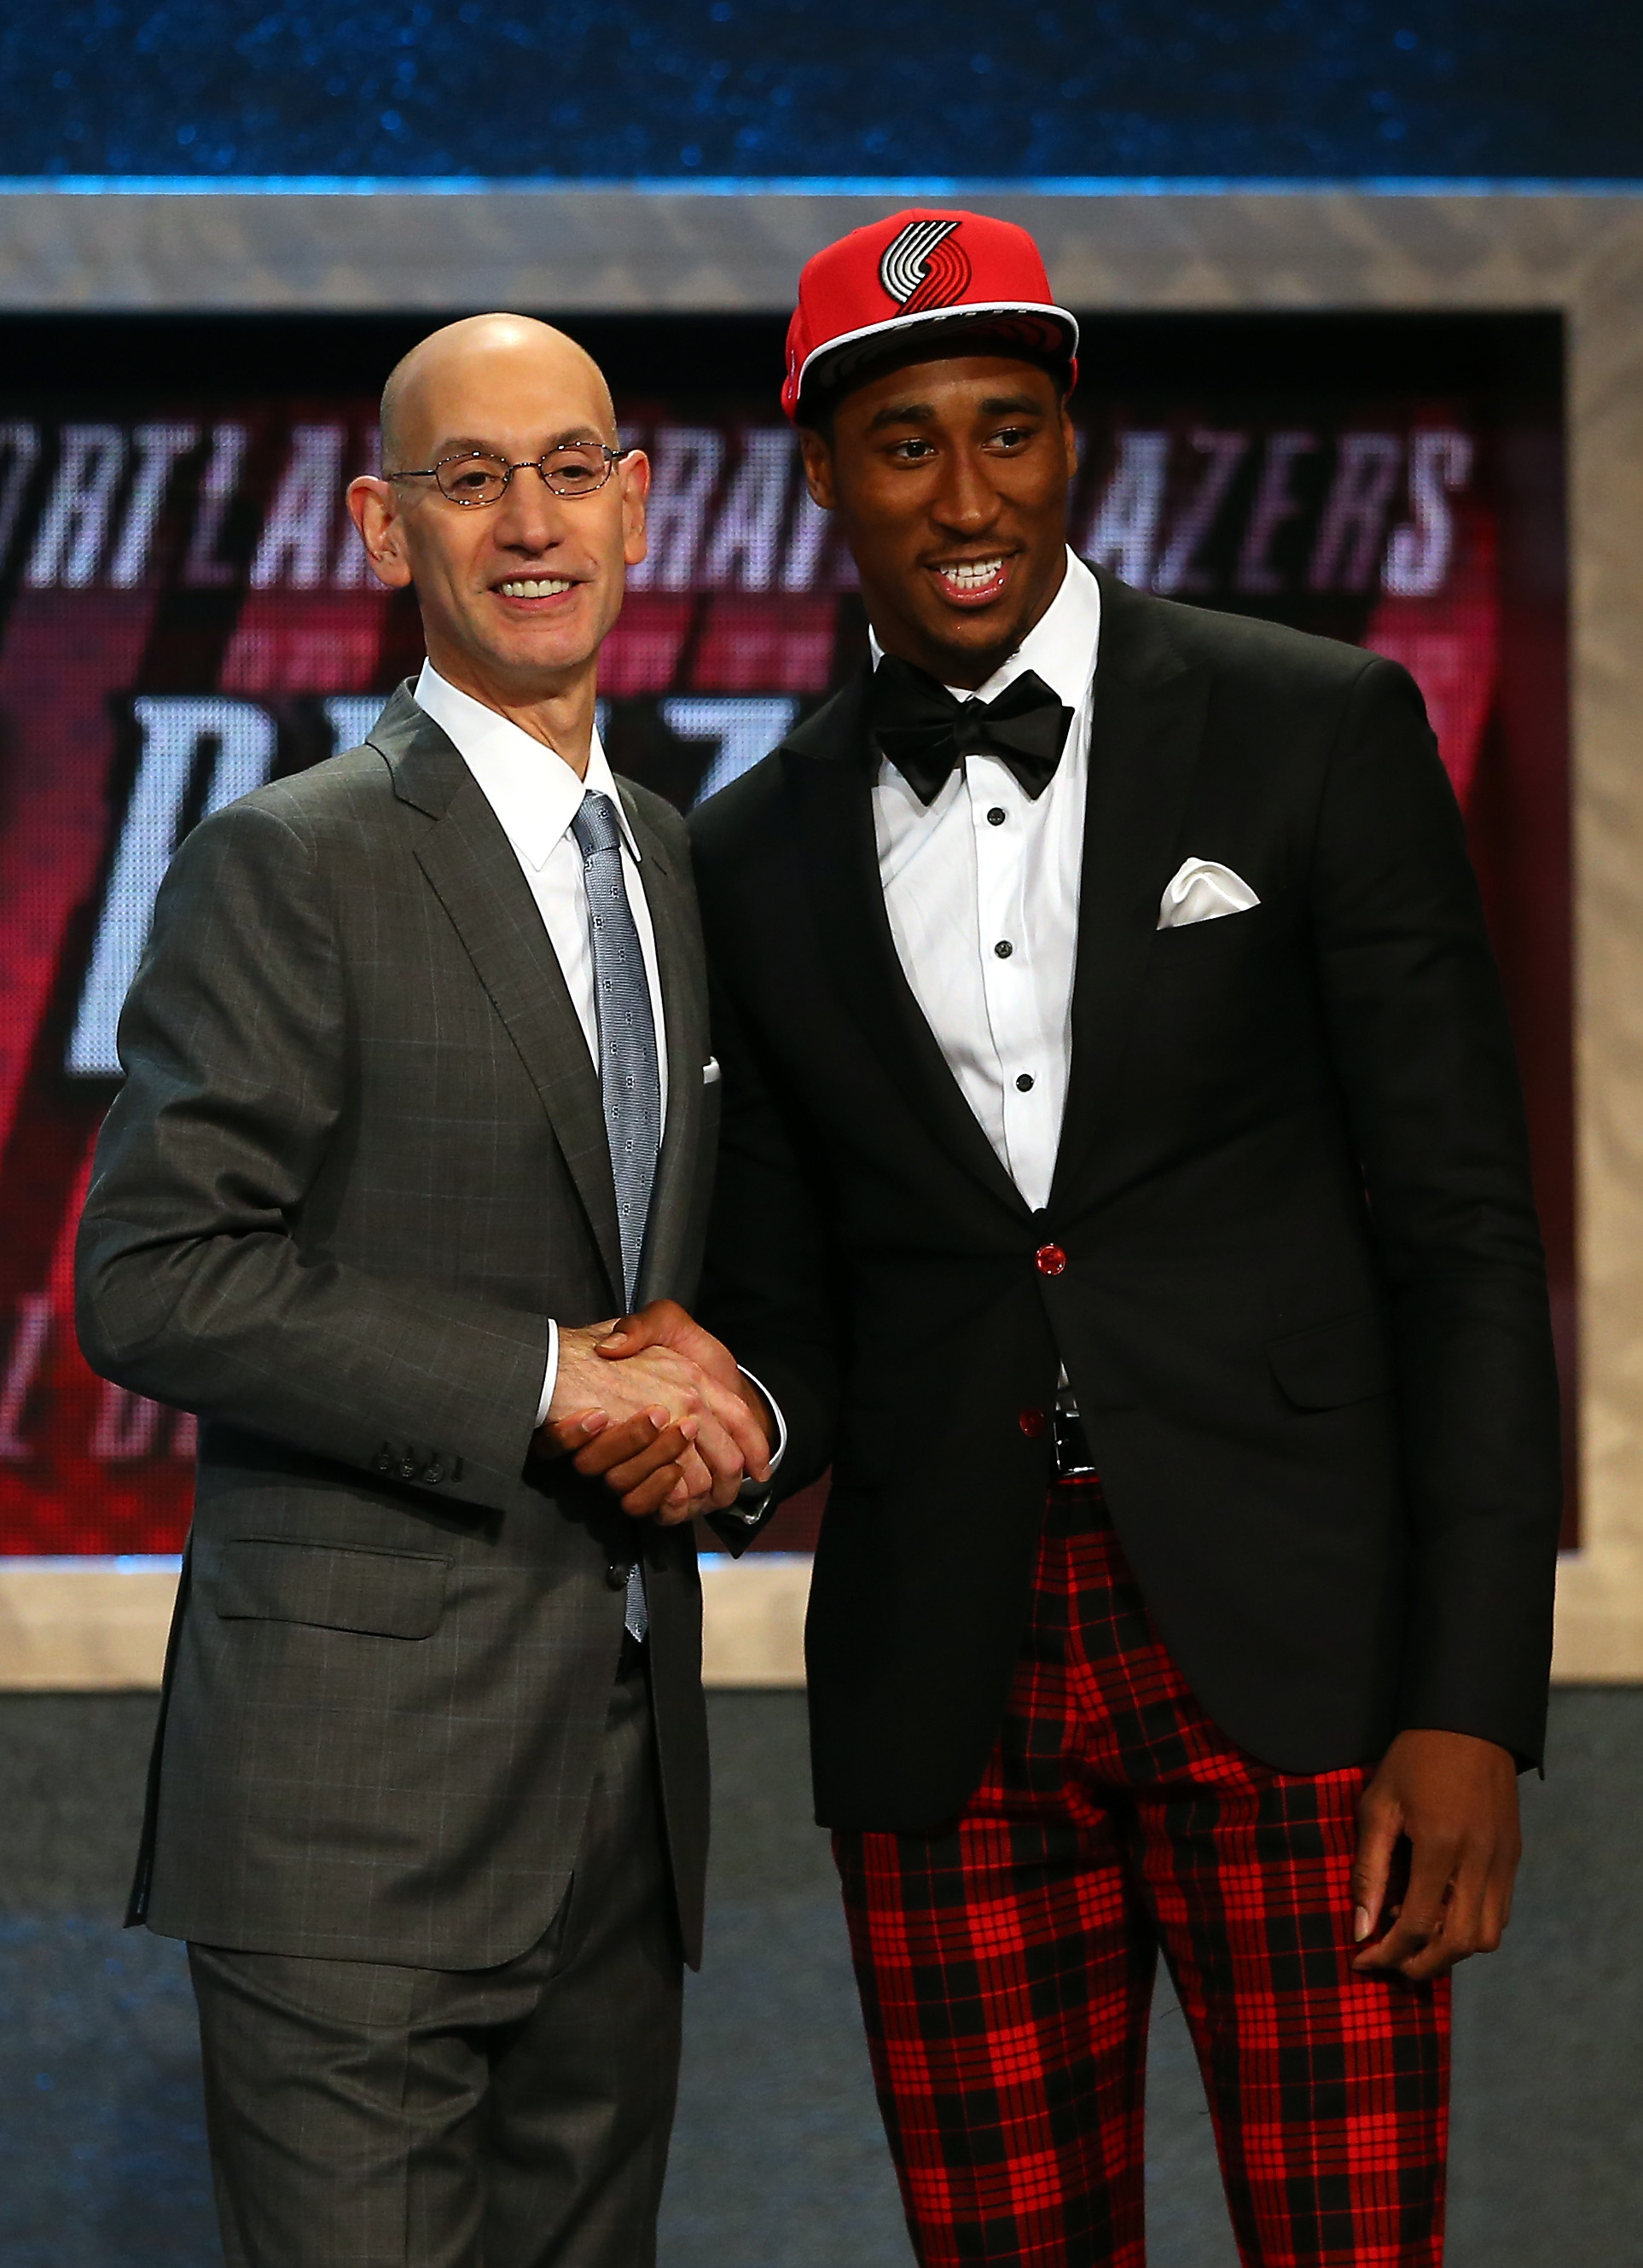 NBA draft suit pics: Best, worst outfits of 2018 - Sports Illustrated